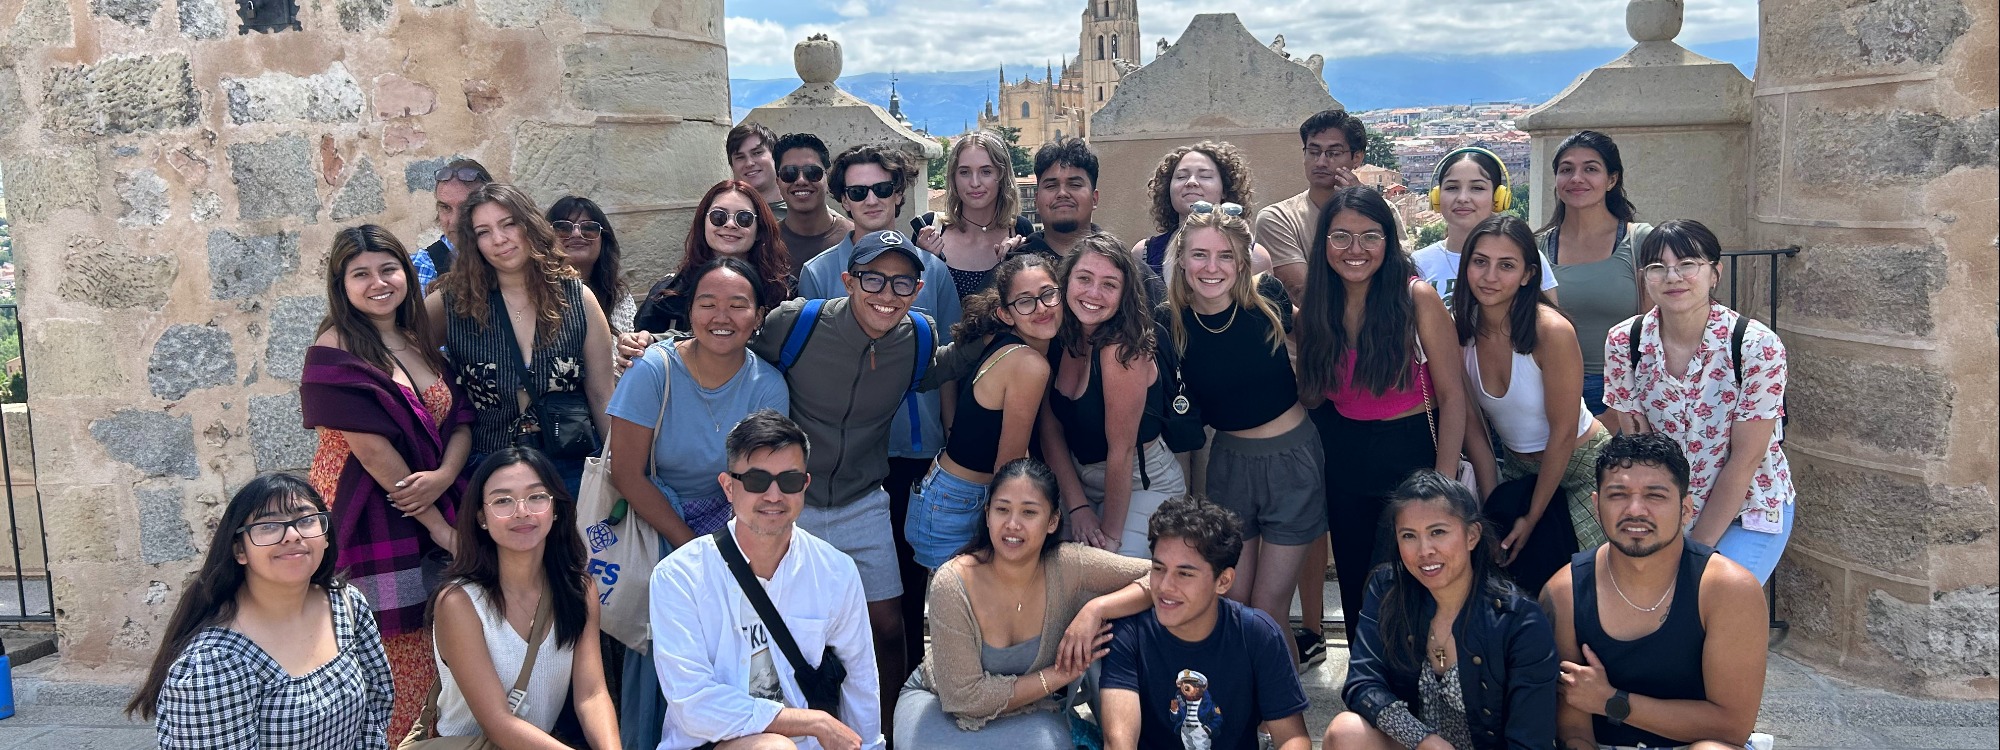 30 students pose for a group photo with the city of Madrid in the background